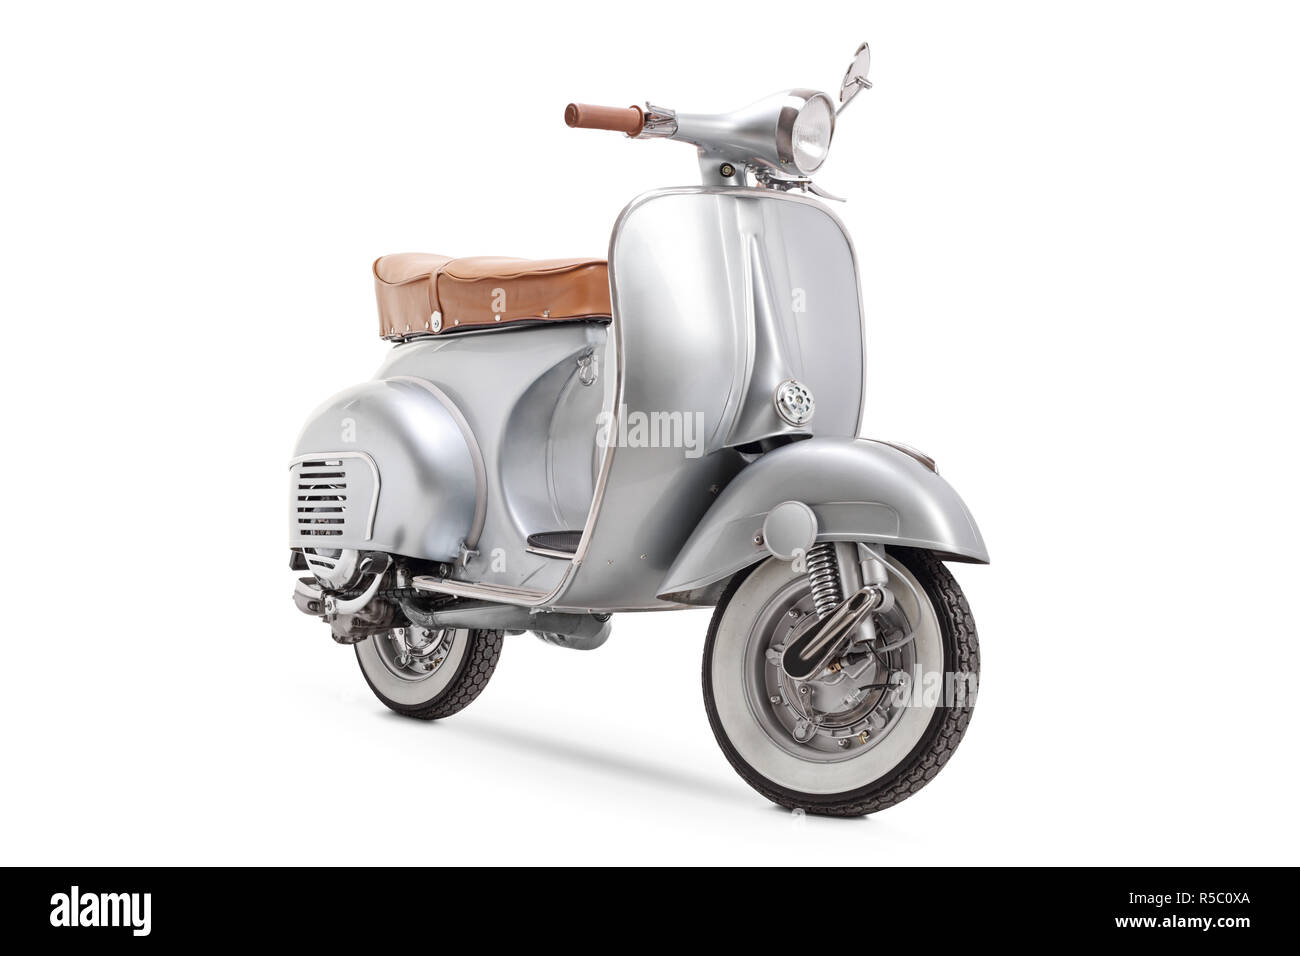 Studio shot of a vintage 1961 VBB 150 Vespa scooter isolated on white background Stock Photo